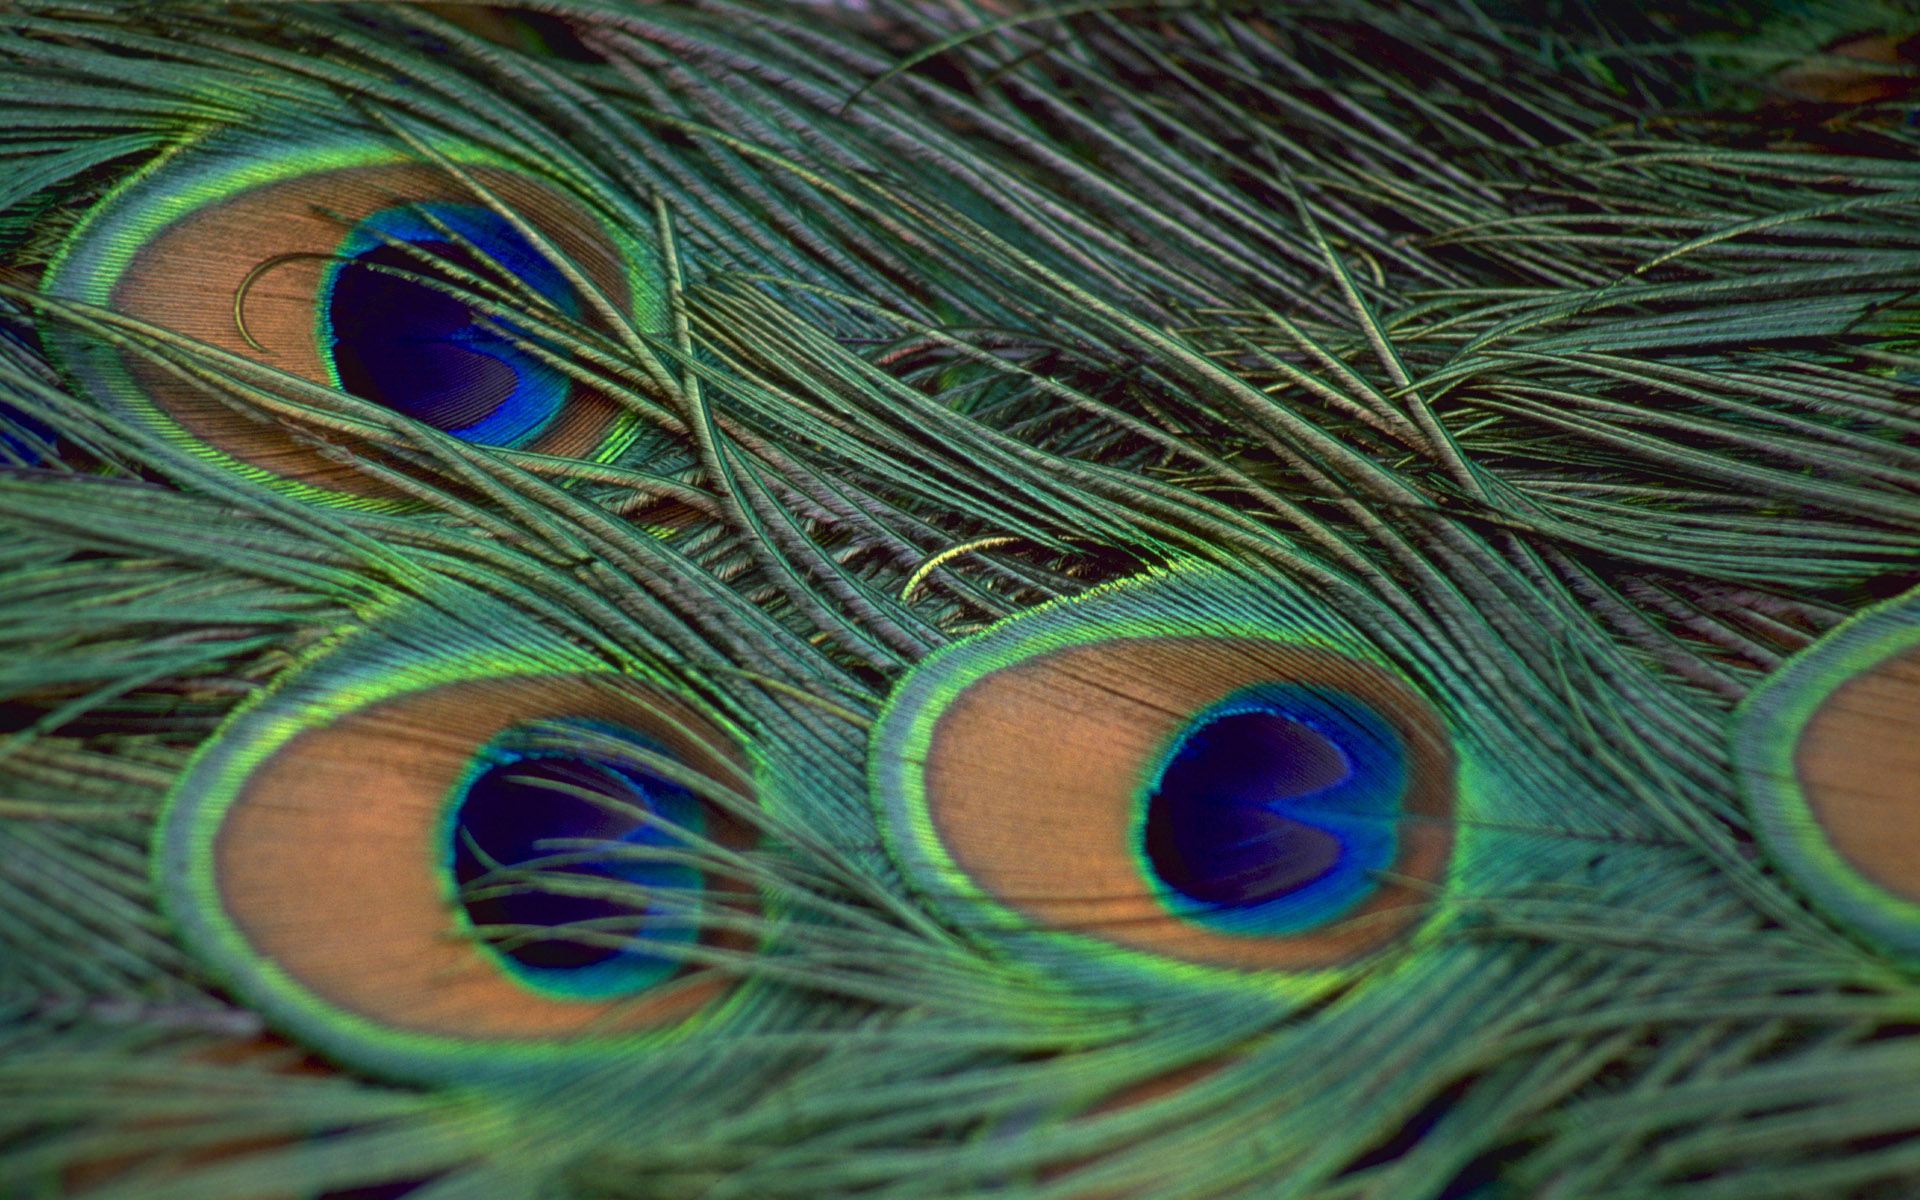 Peacock Feathers wallpapers and images - wallpapers, pictures, photos